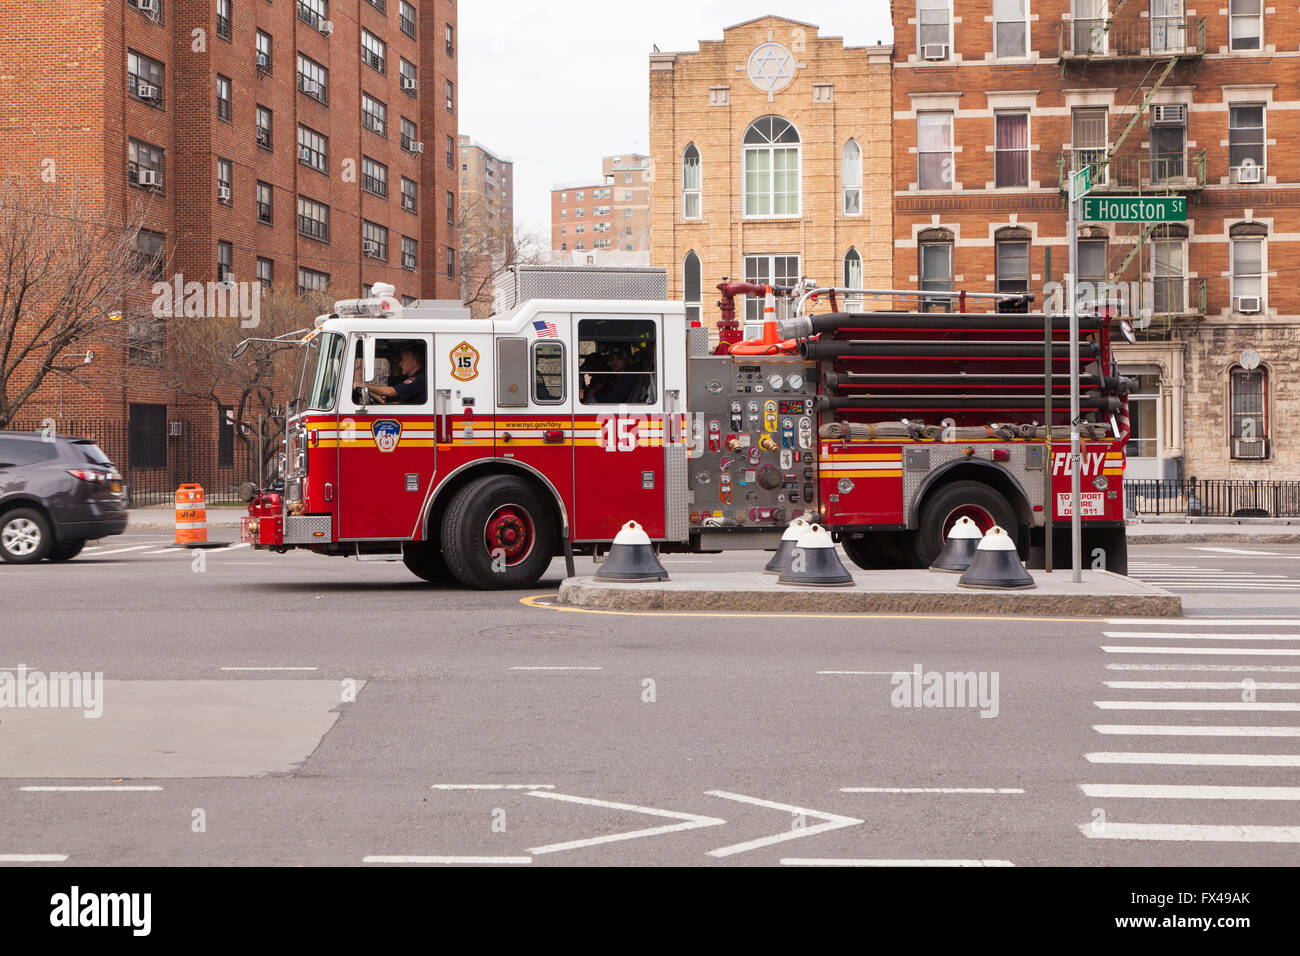 Fire truck , Lower east Side, New York City, United States of America. Stock Photo